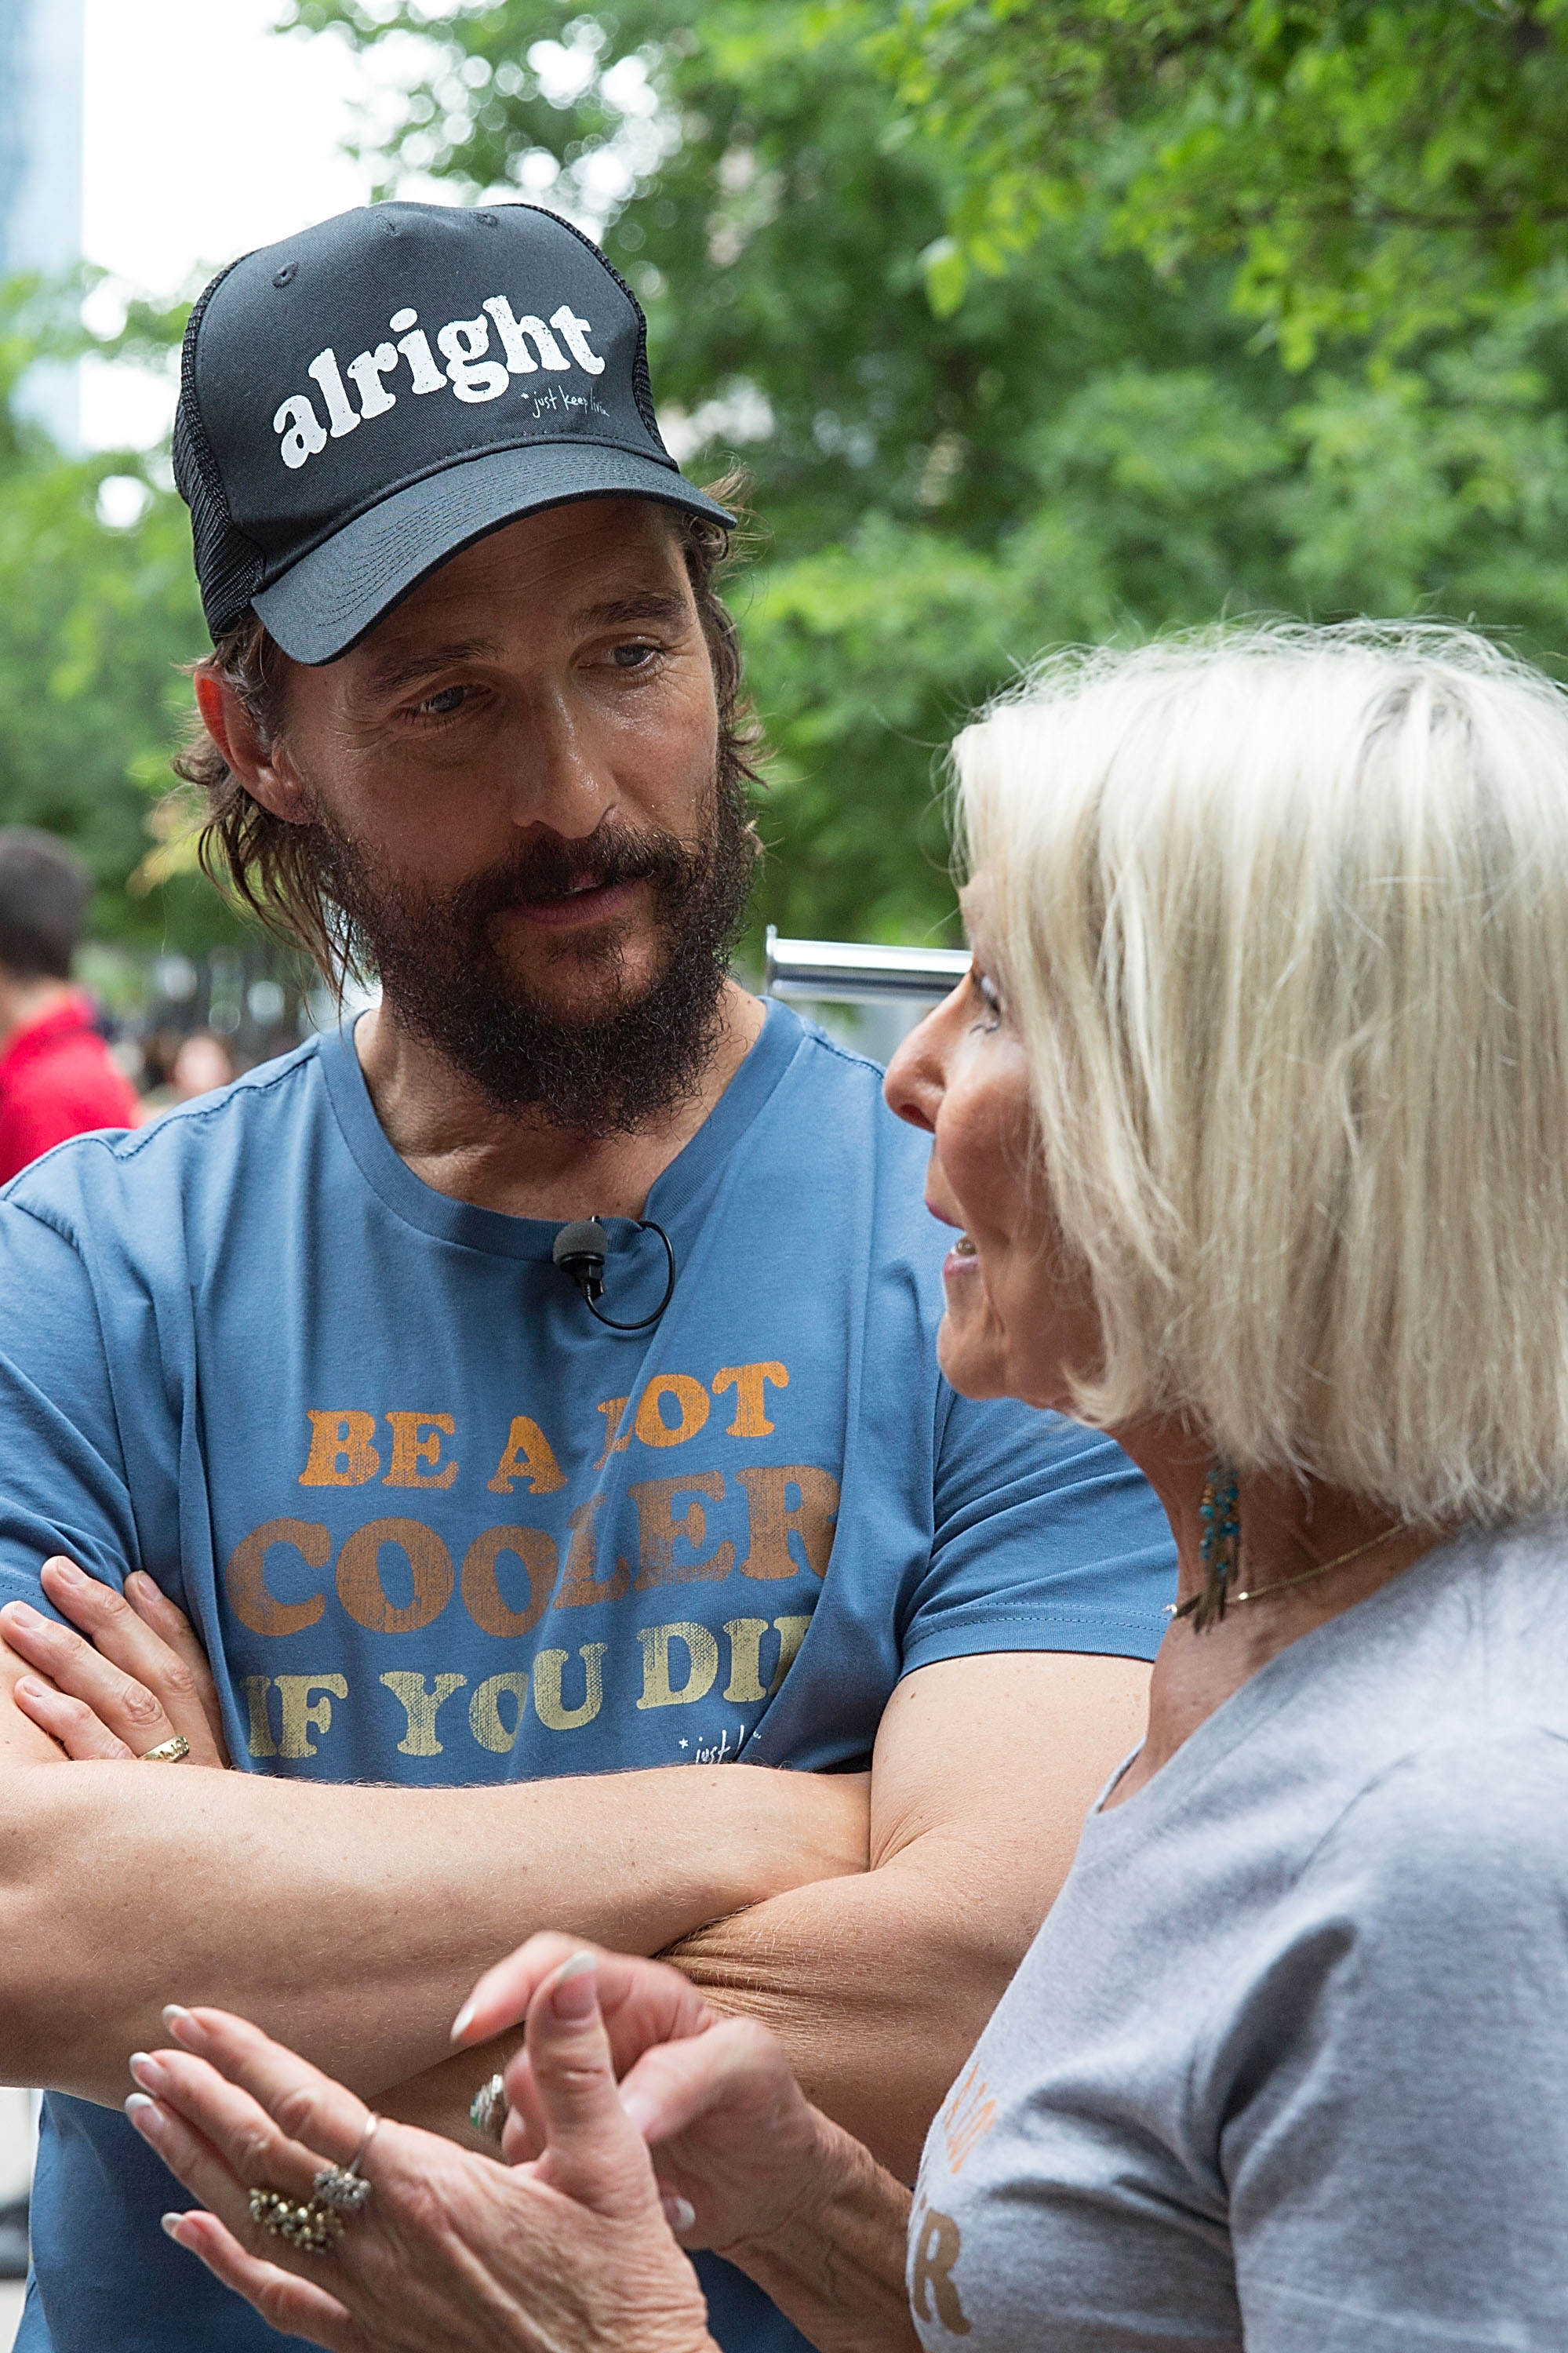 Matthew and Kay McConaughey at the "Just Keep Livin" Pop-up shop in Austin, Texas on April 17, 2015 | Source: Getty Images